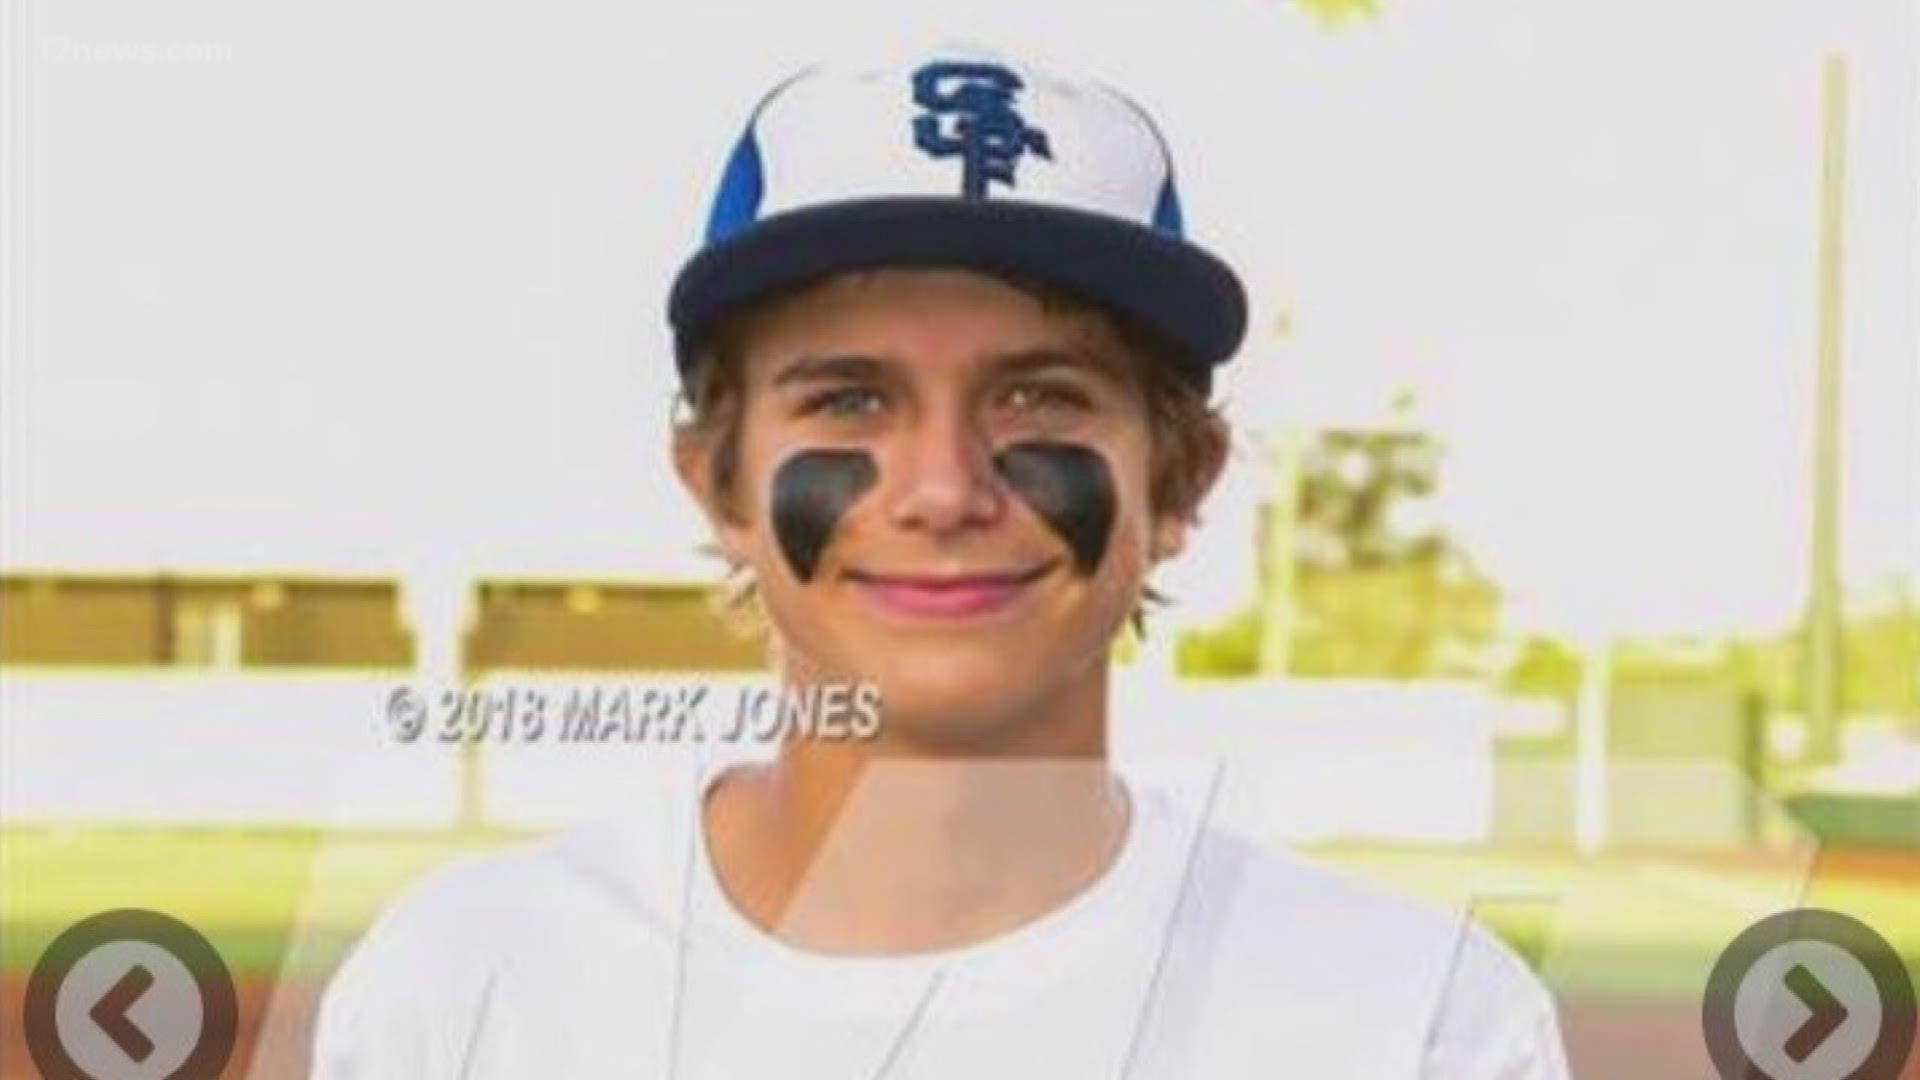 A young man from the San Tan Valley, who was seriously injured while riding his skateboard last week, will be taken off life support tonight at Banner Desert Medical Center. Dylan Barrier was an organ donor. His decision to give back in death will help up to eight other's lives.